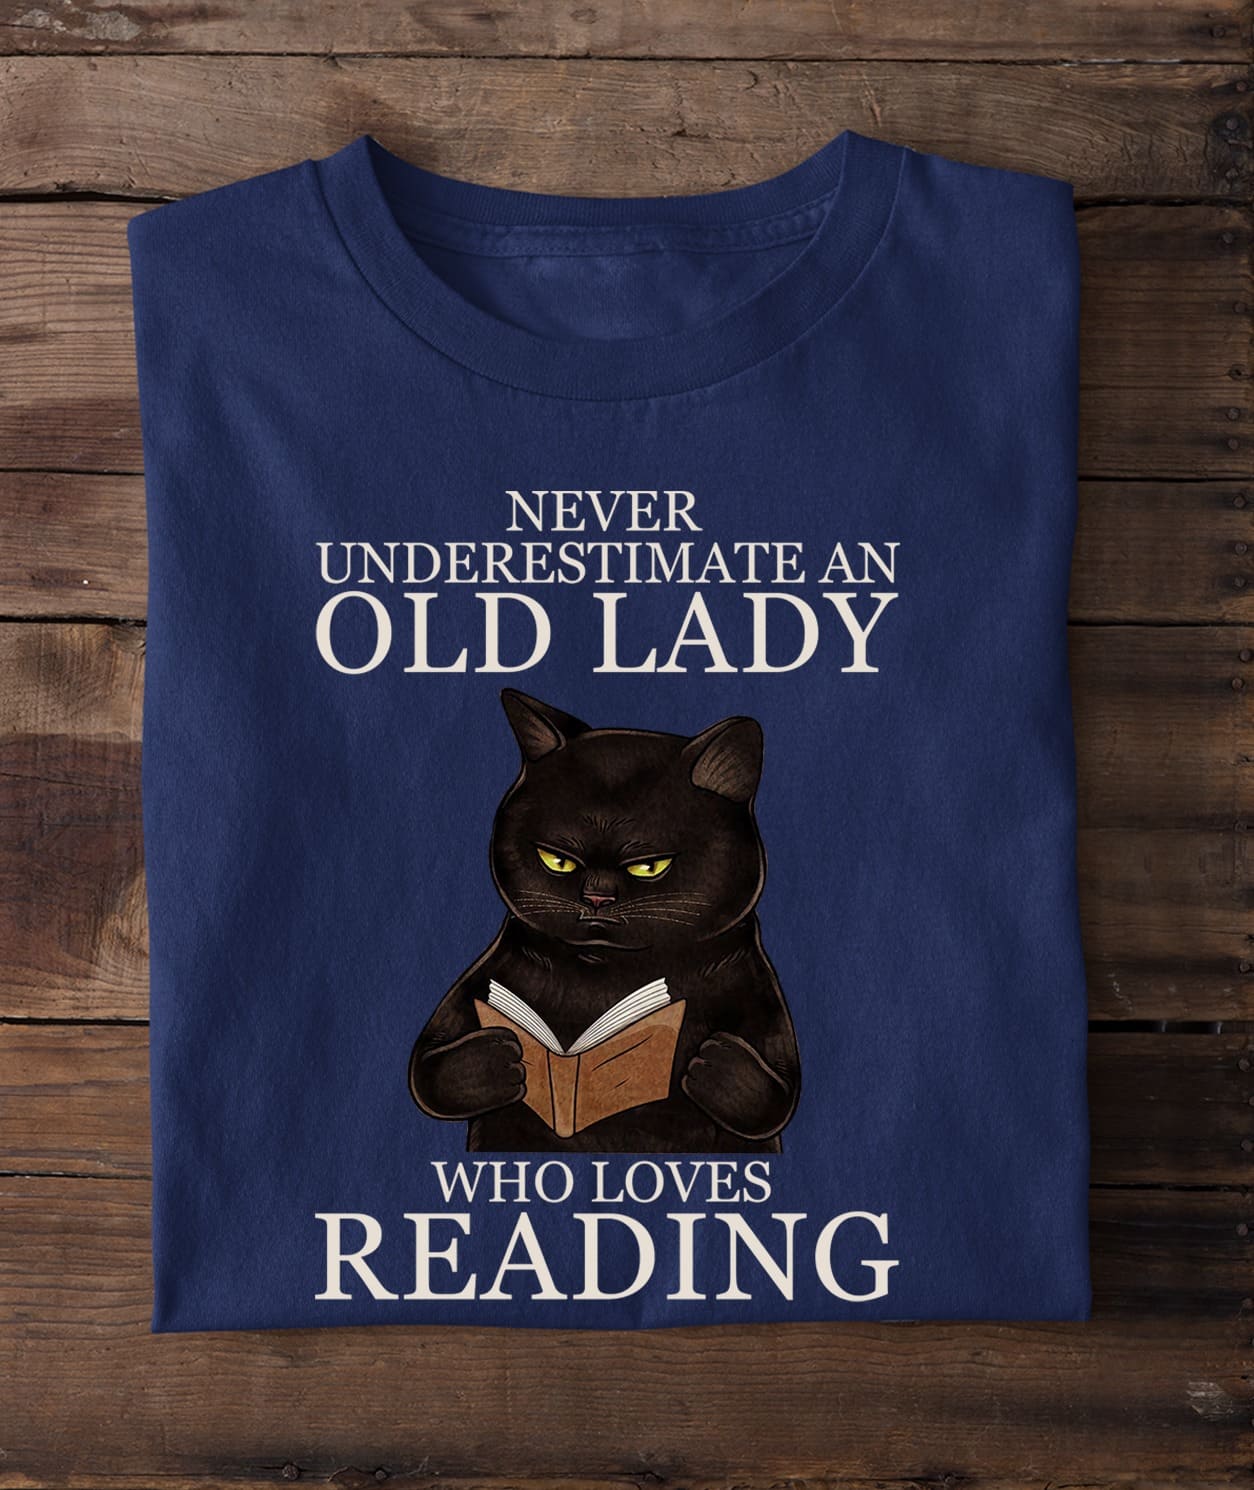 Never underestimate an old lady who loves reading - Black cat reading books, book lady T-shirt